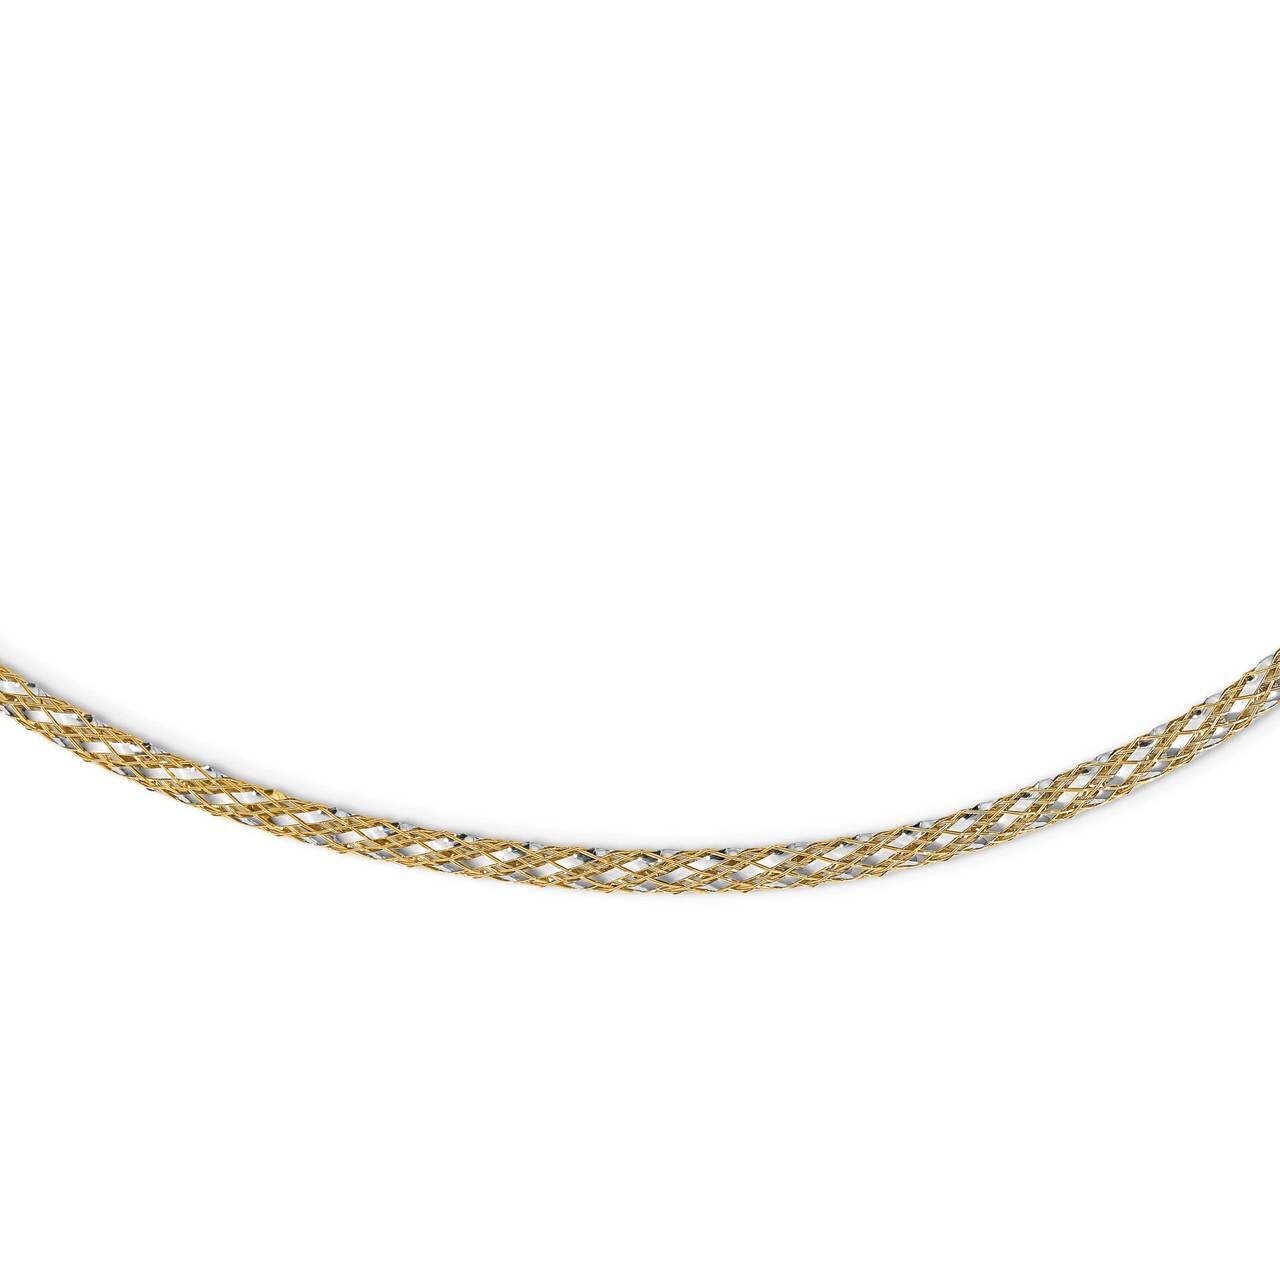 Woven Mesh Necklace 14k Two-tone Gold SF2685-17.25